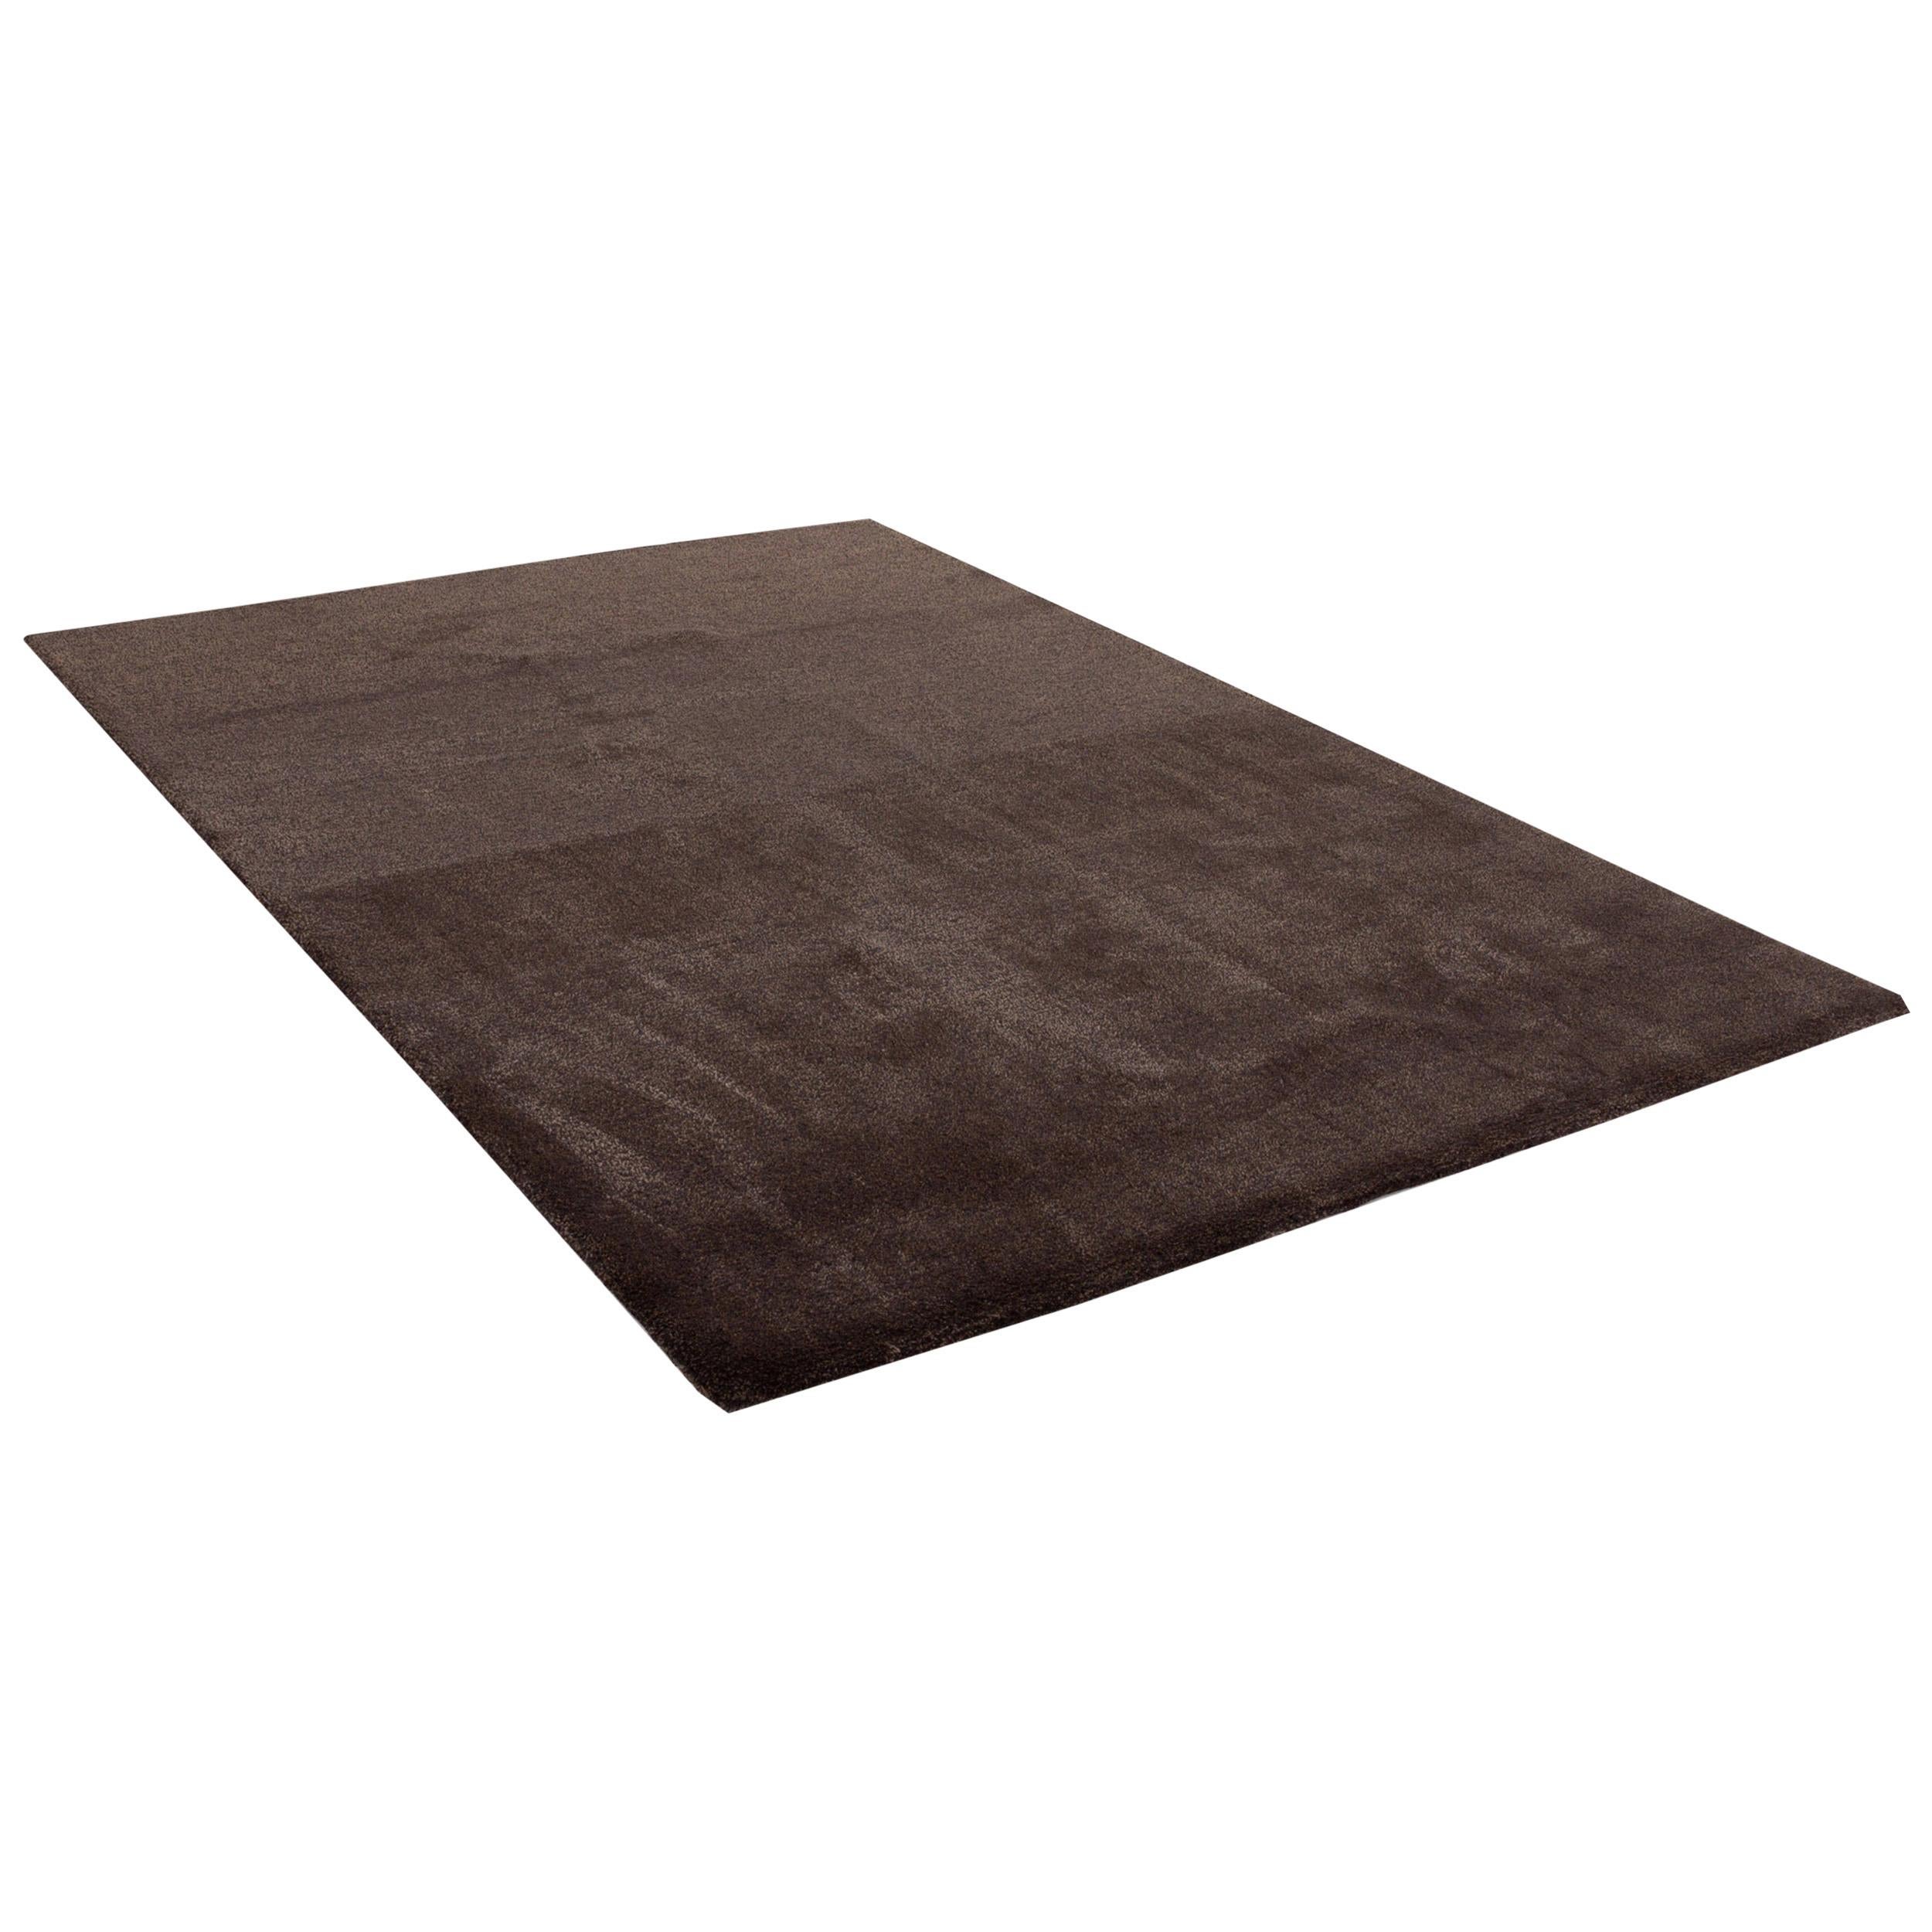 Rolf Benz Solo Fabric Carpet Brown Carpet For Sale